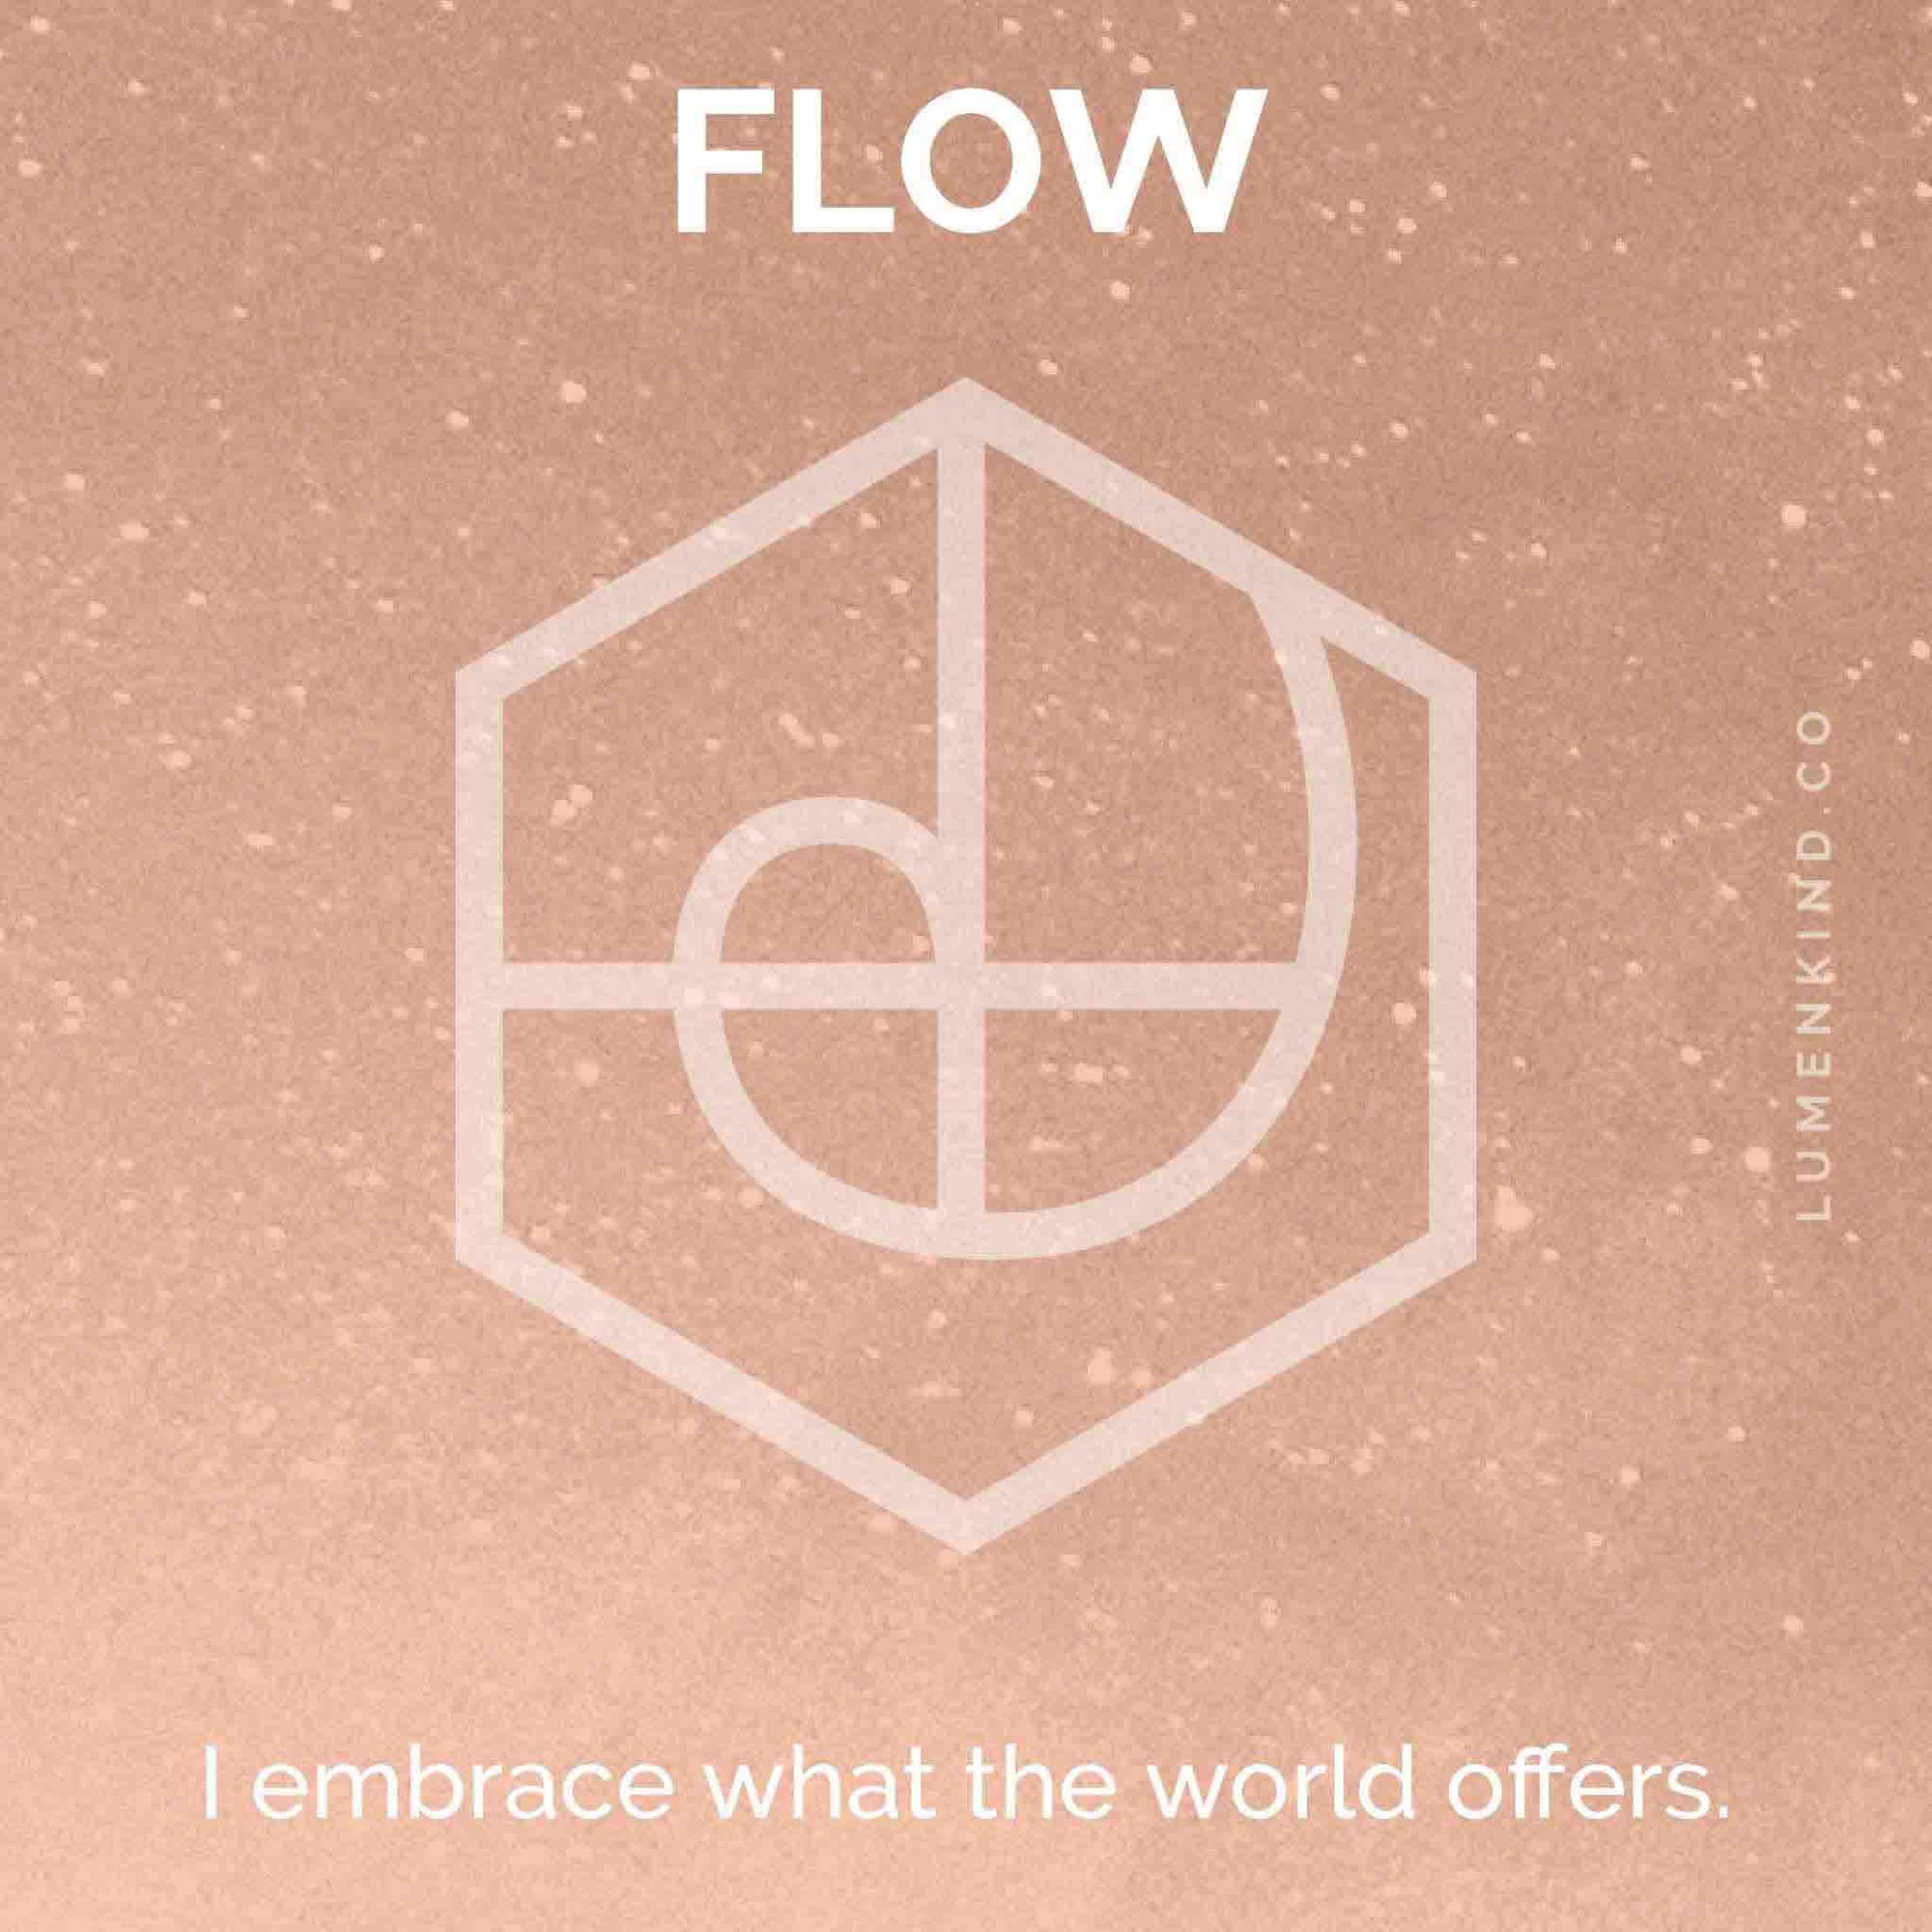 The suggested intention is FLOW. I embrace what the world offers.